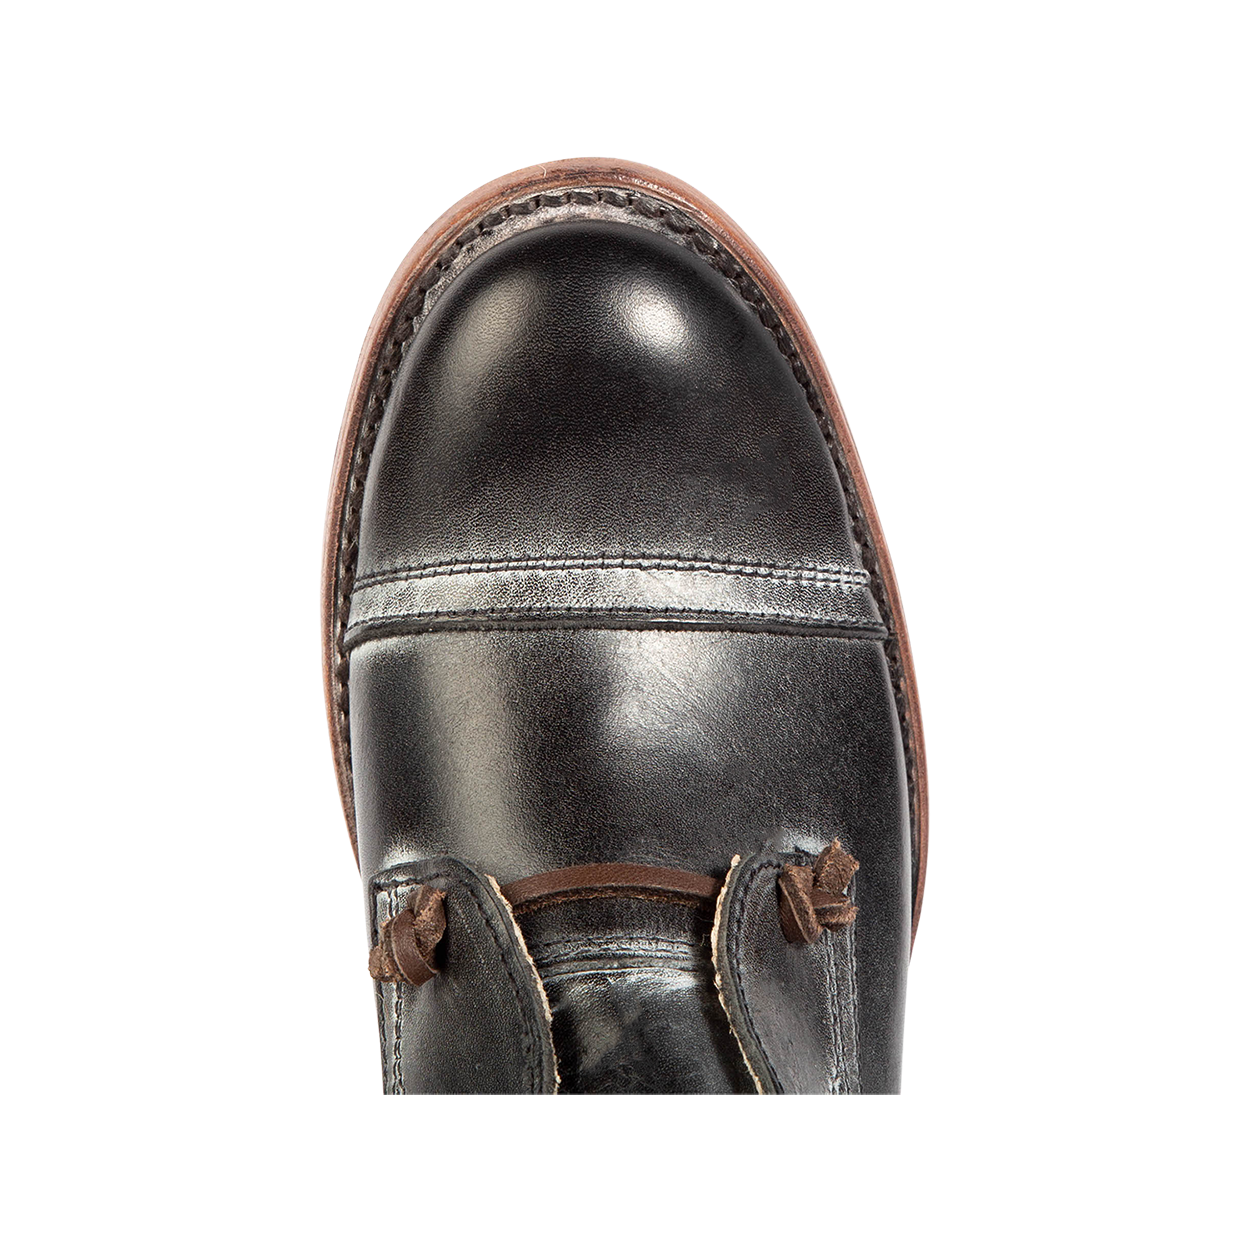 Top view showing almond toe and decorative knotted leather lace on FREEBIRD women's Mabel black shoe